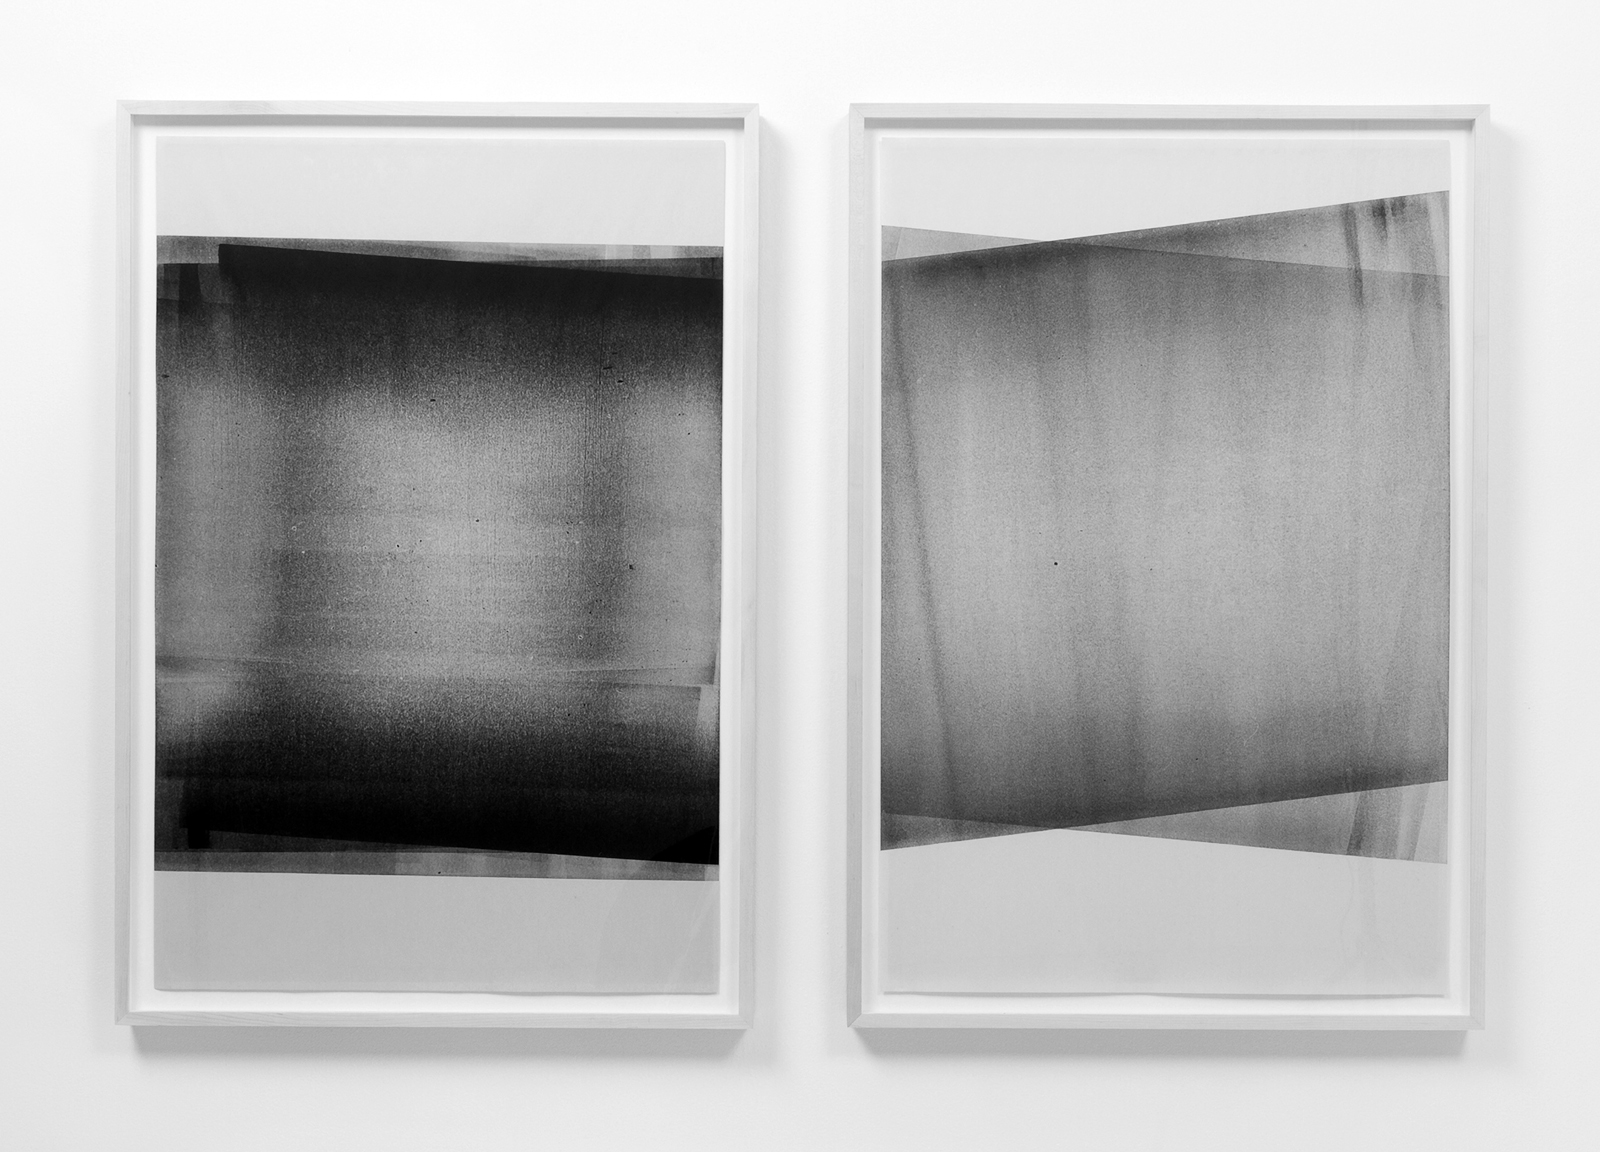  Untitled Diptych (reflected/repeated #1, and #4)  2014, Oil based ink on newsprint, 24 x 36 inches each  